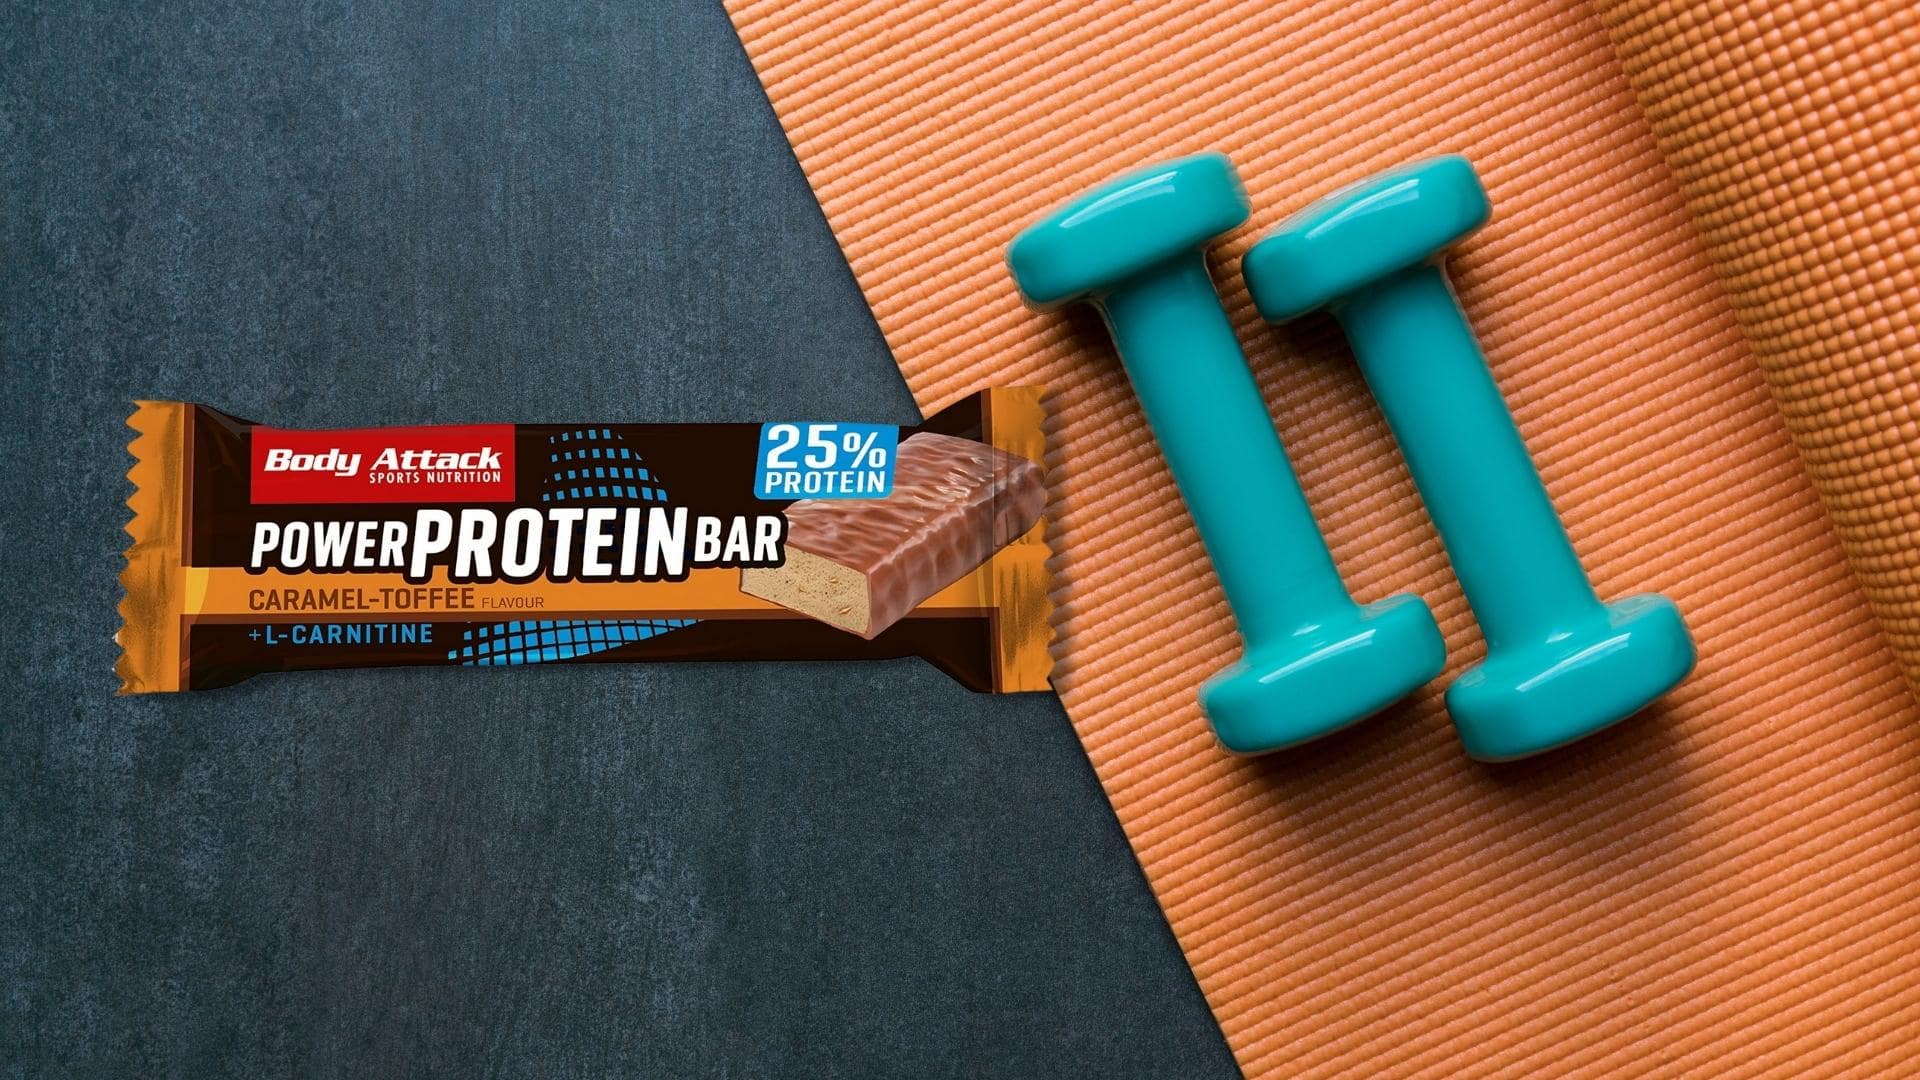 Body Attack - Power Protein Bar - Caramel - Toffee